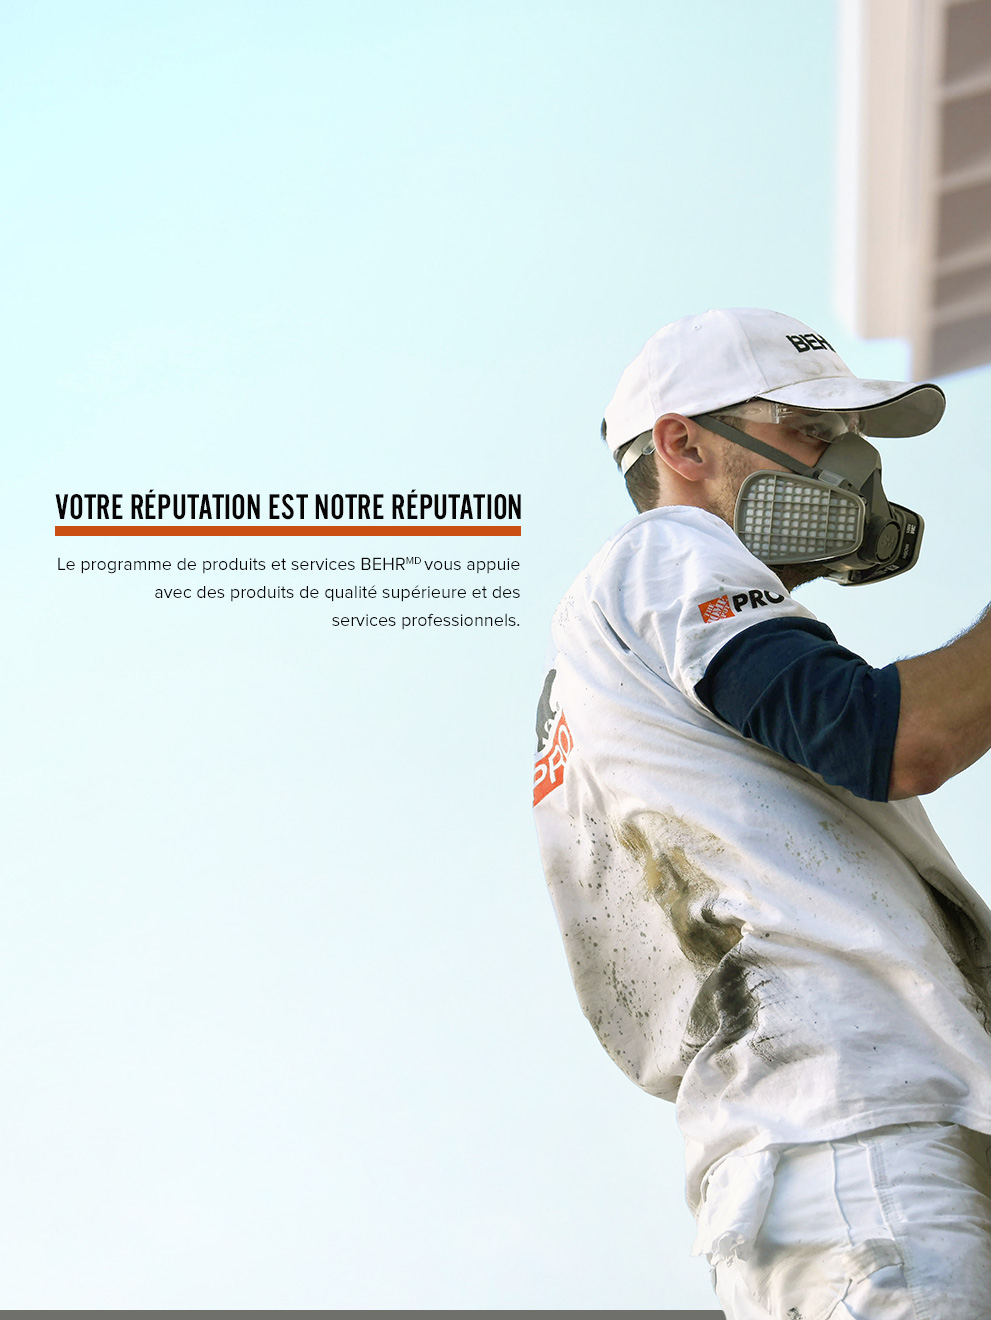 Mobile view of an Image of a Pro Contractor wearing a hat and shirt with Behr logo spray painting an exterior wall of a house on a ladder.